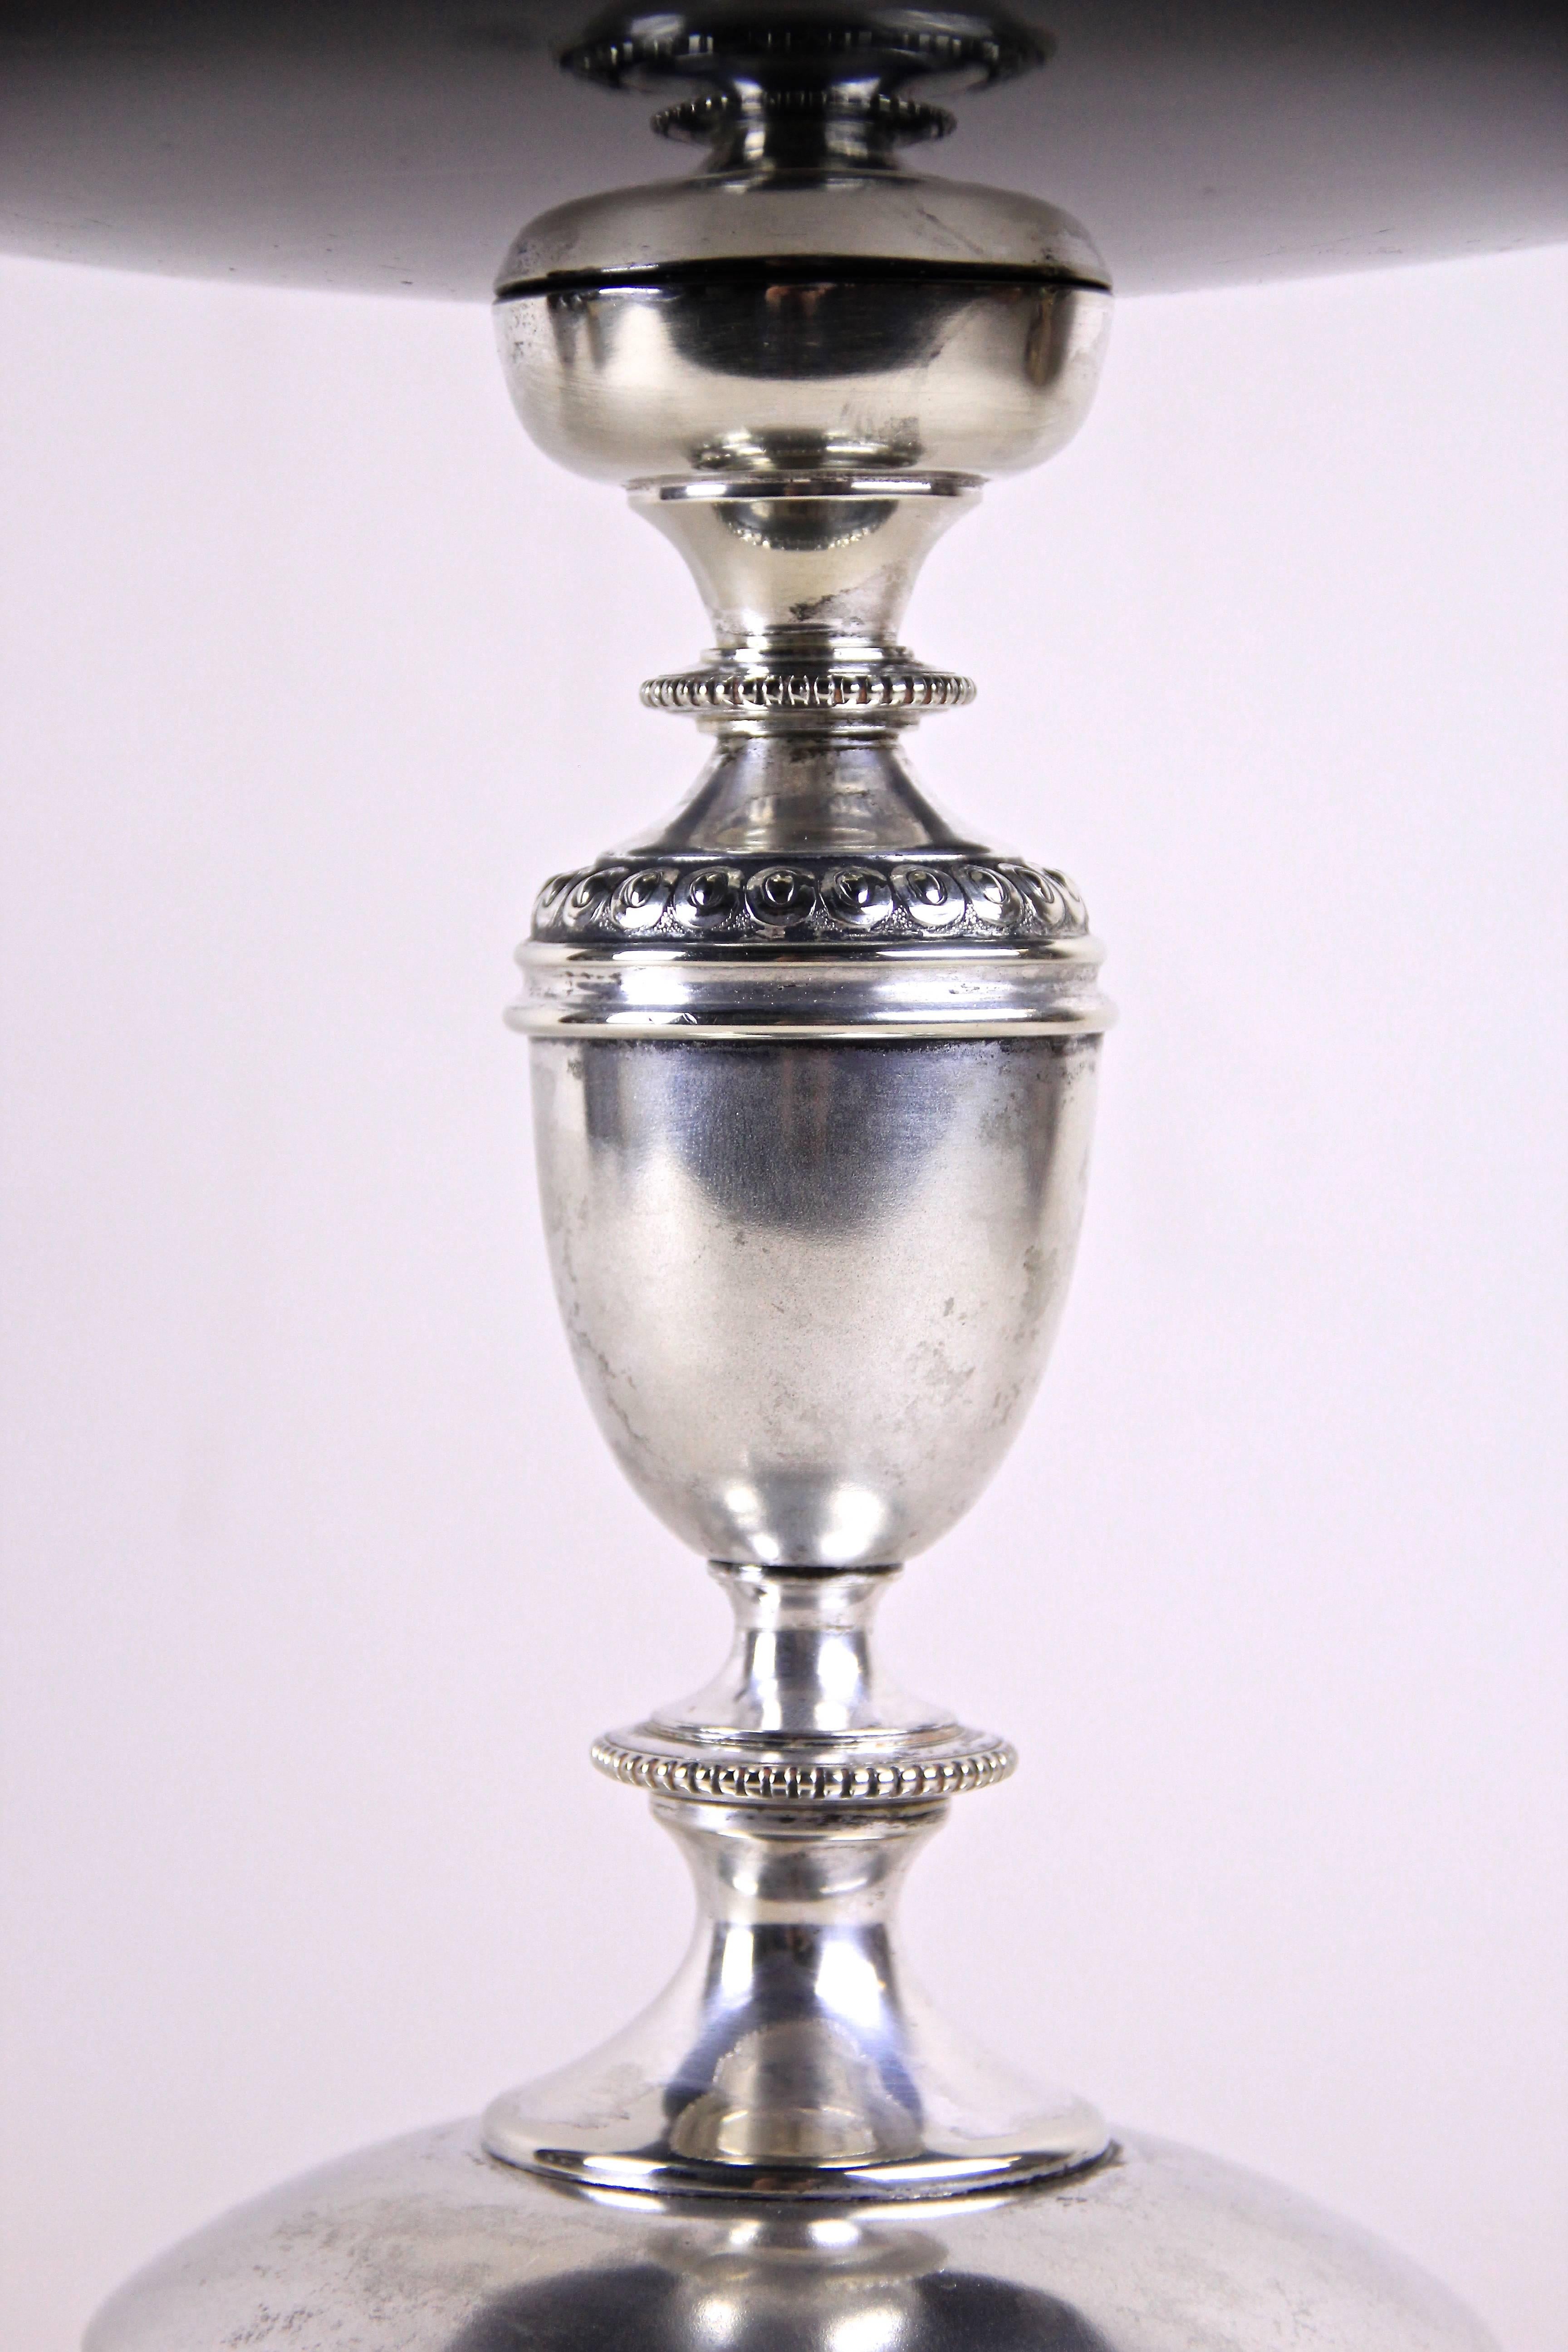 Hand-Painted Silvered Centerpiece with Glass Plate Historism, Austria, circa 1880